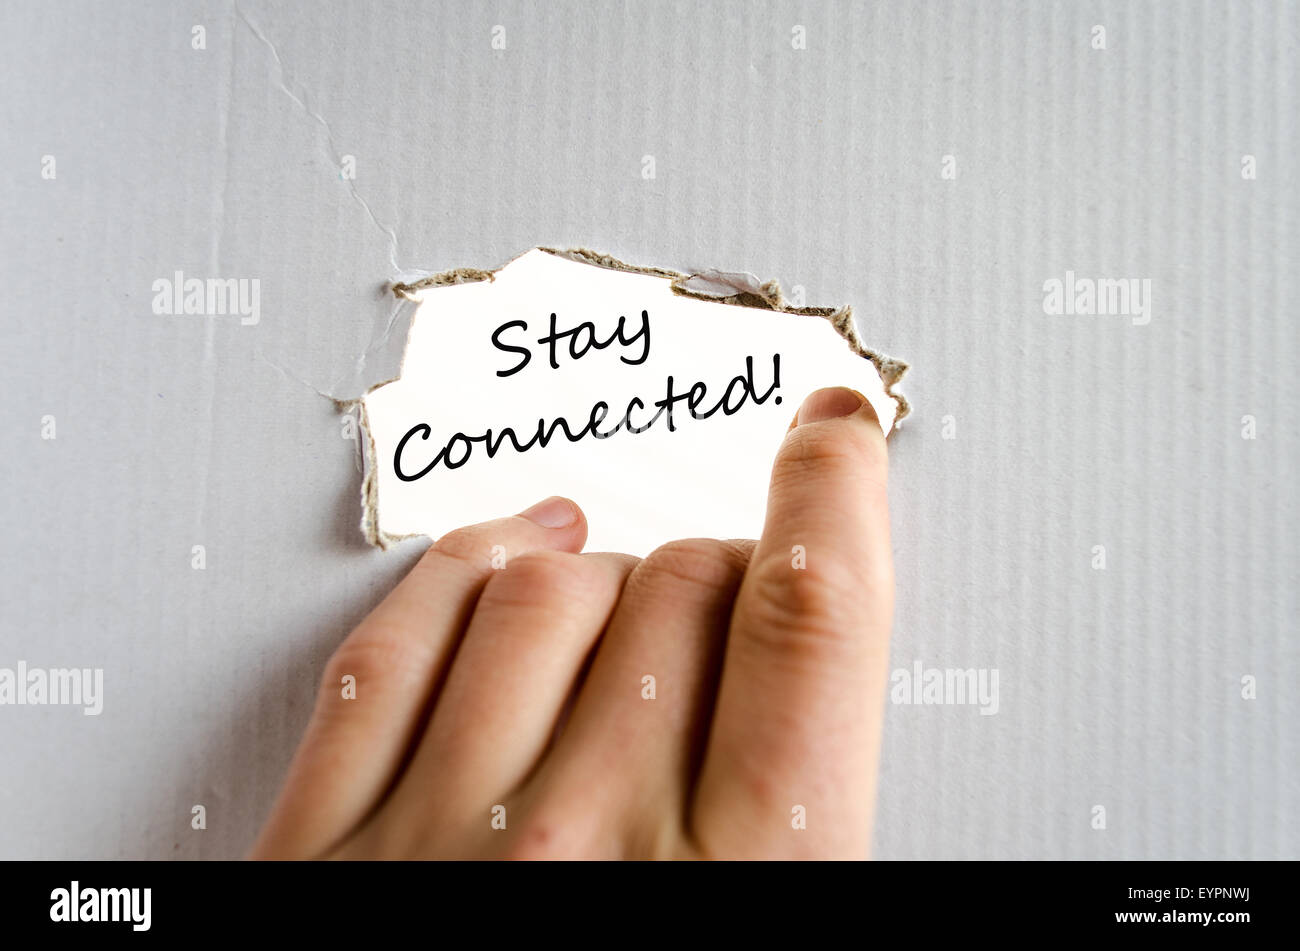 Stay connected hand concept isolated over white background Stock Photo